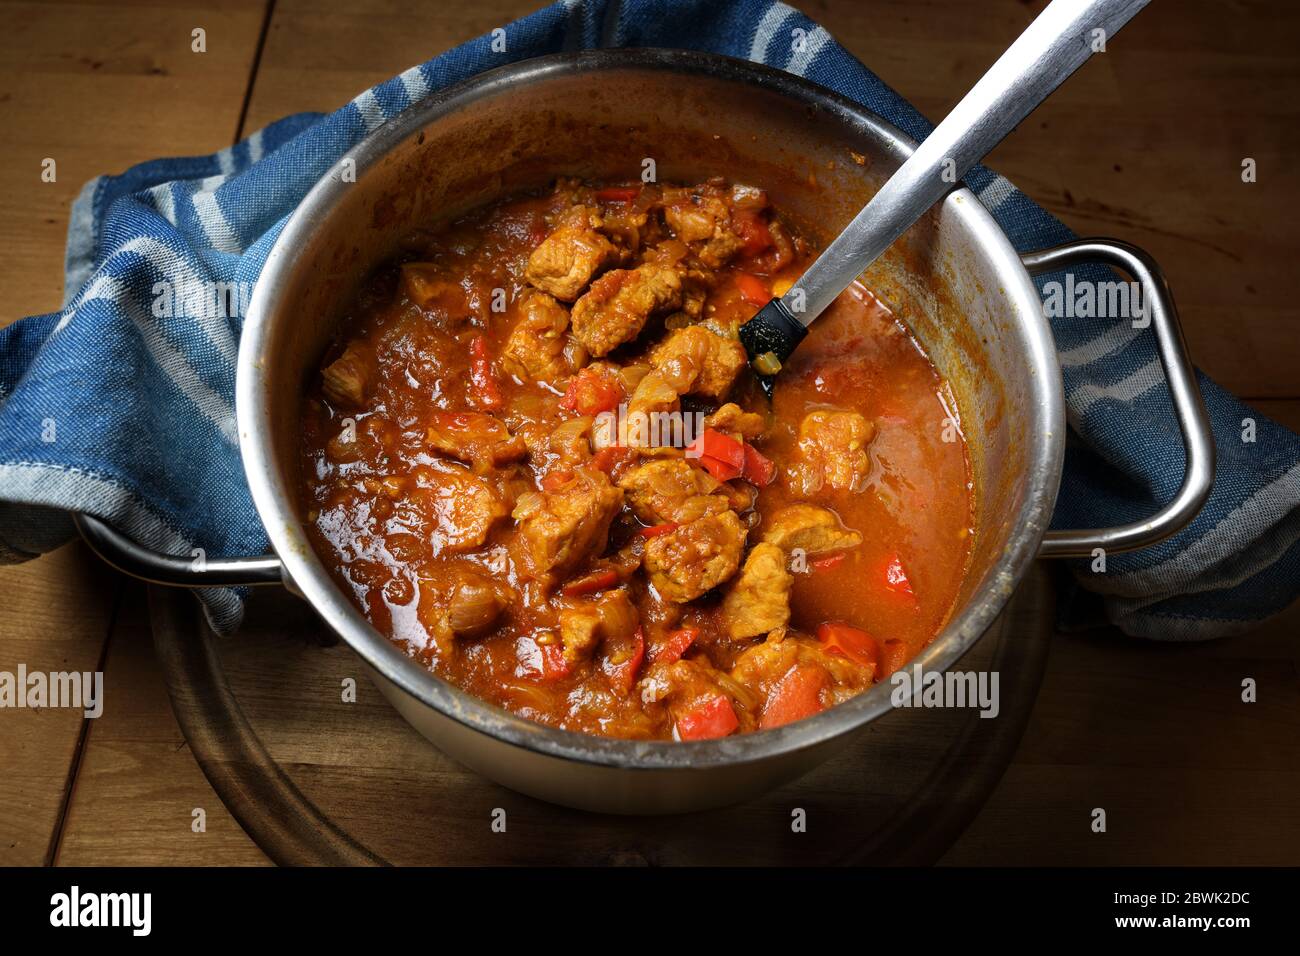 Freshly cooked goulash or stew from pork meat with red peppers and onions in a stainless steel pot on a rustic wooden board, selected focus Stock Photo